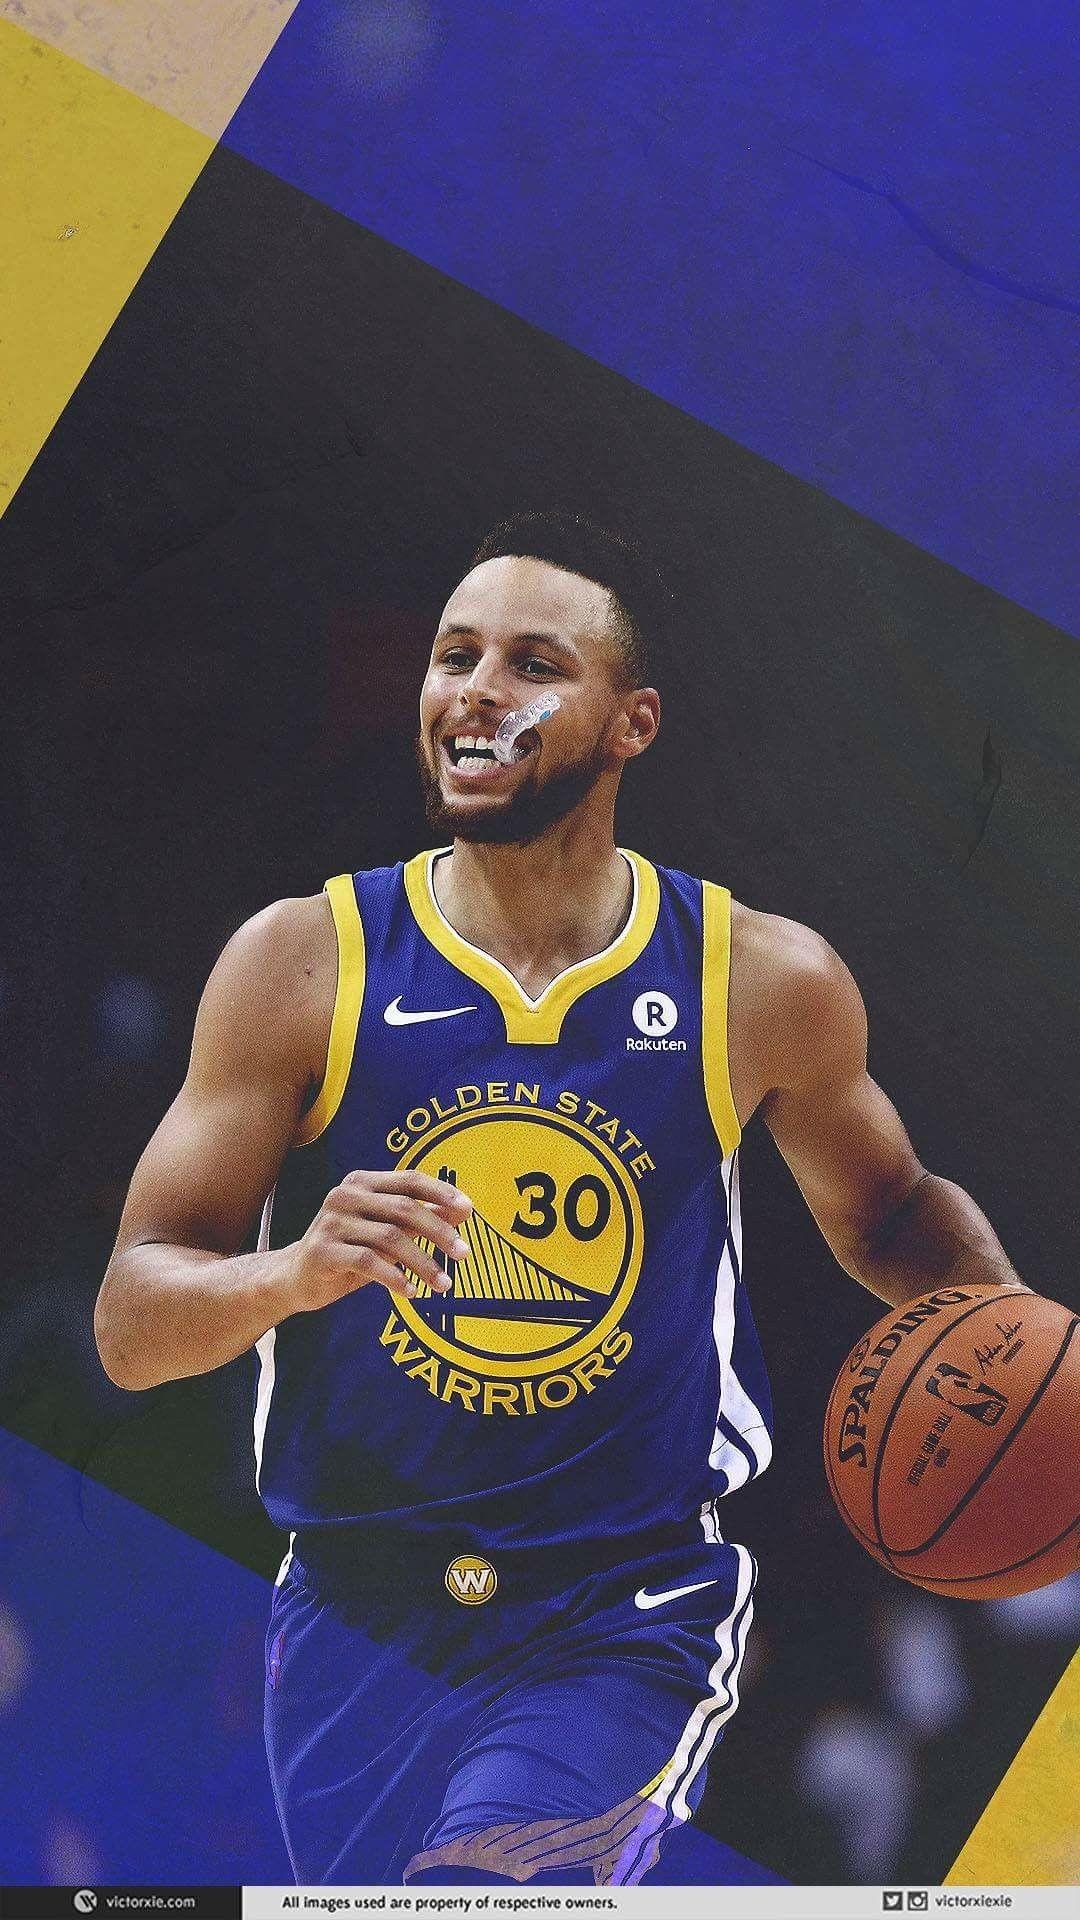 Stephen Curry iPhone Wallpaper